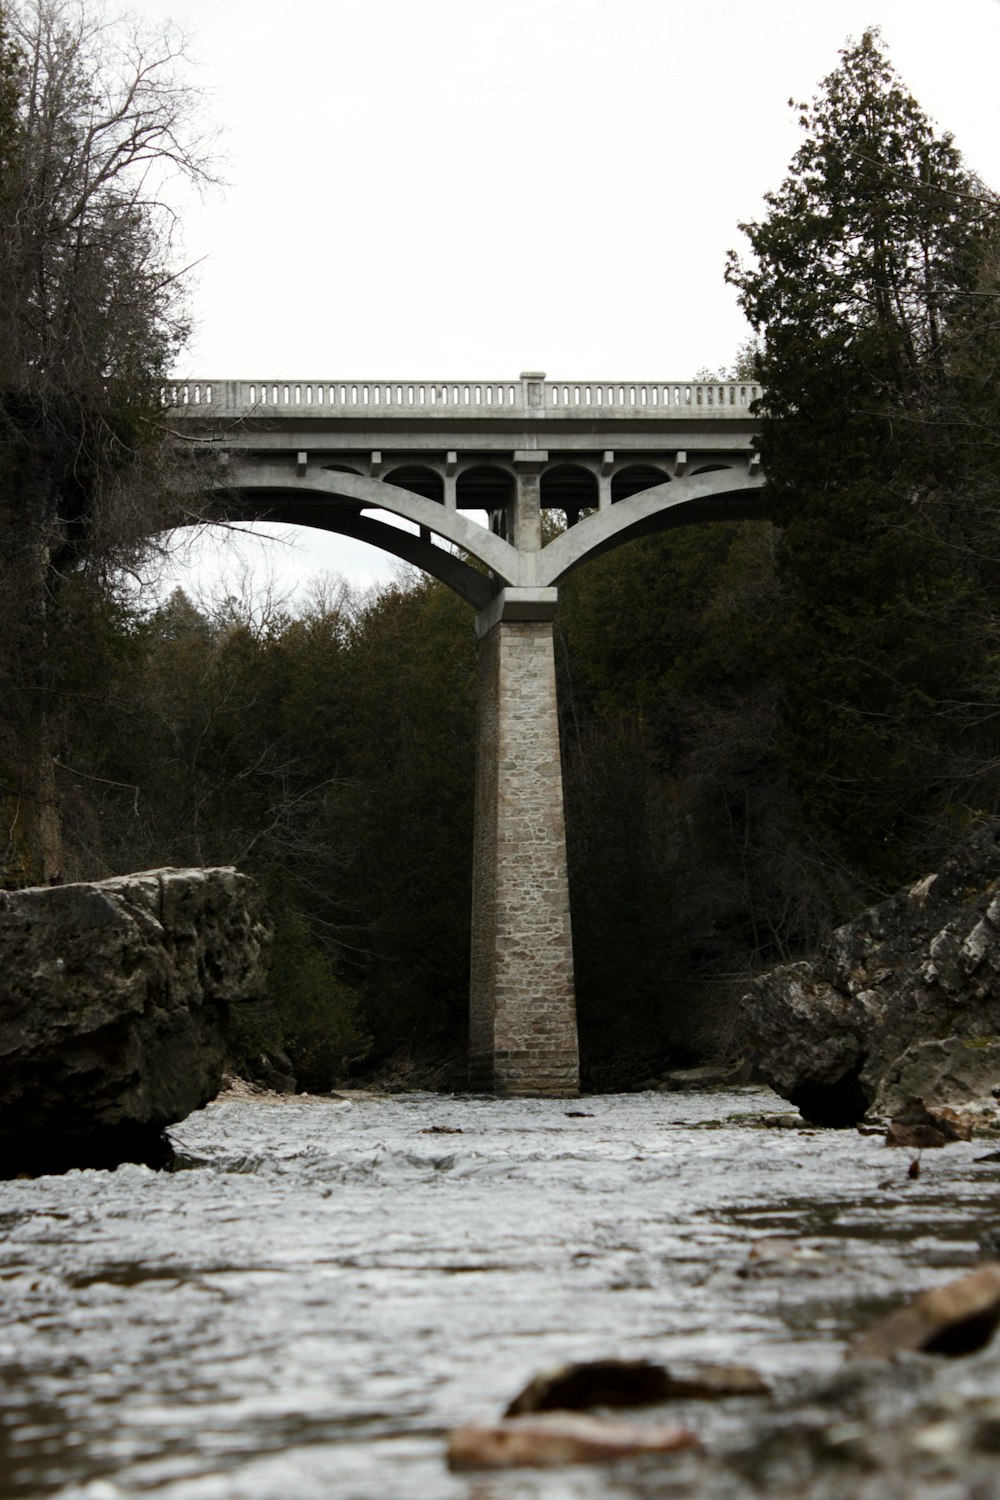 a bridge over a river with rocks and trees